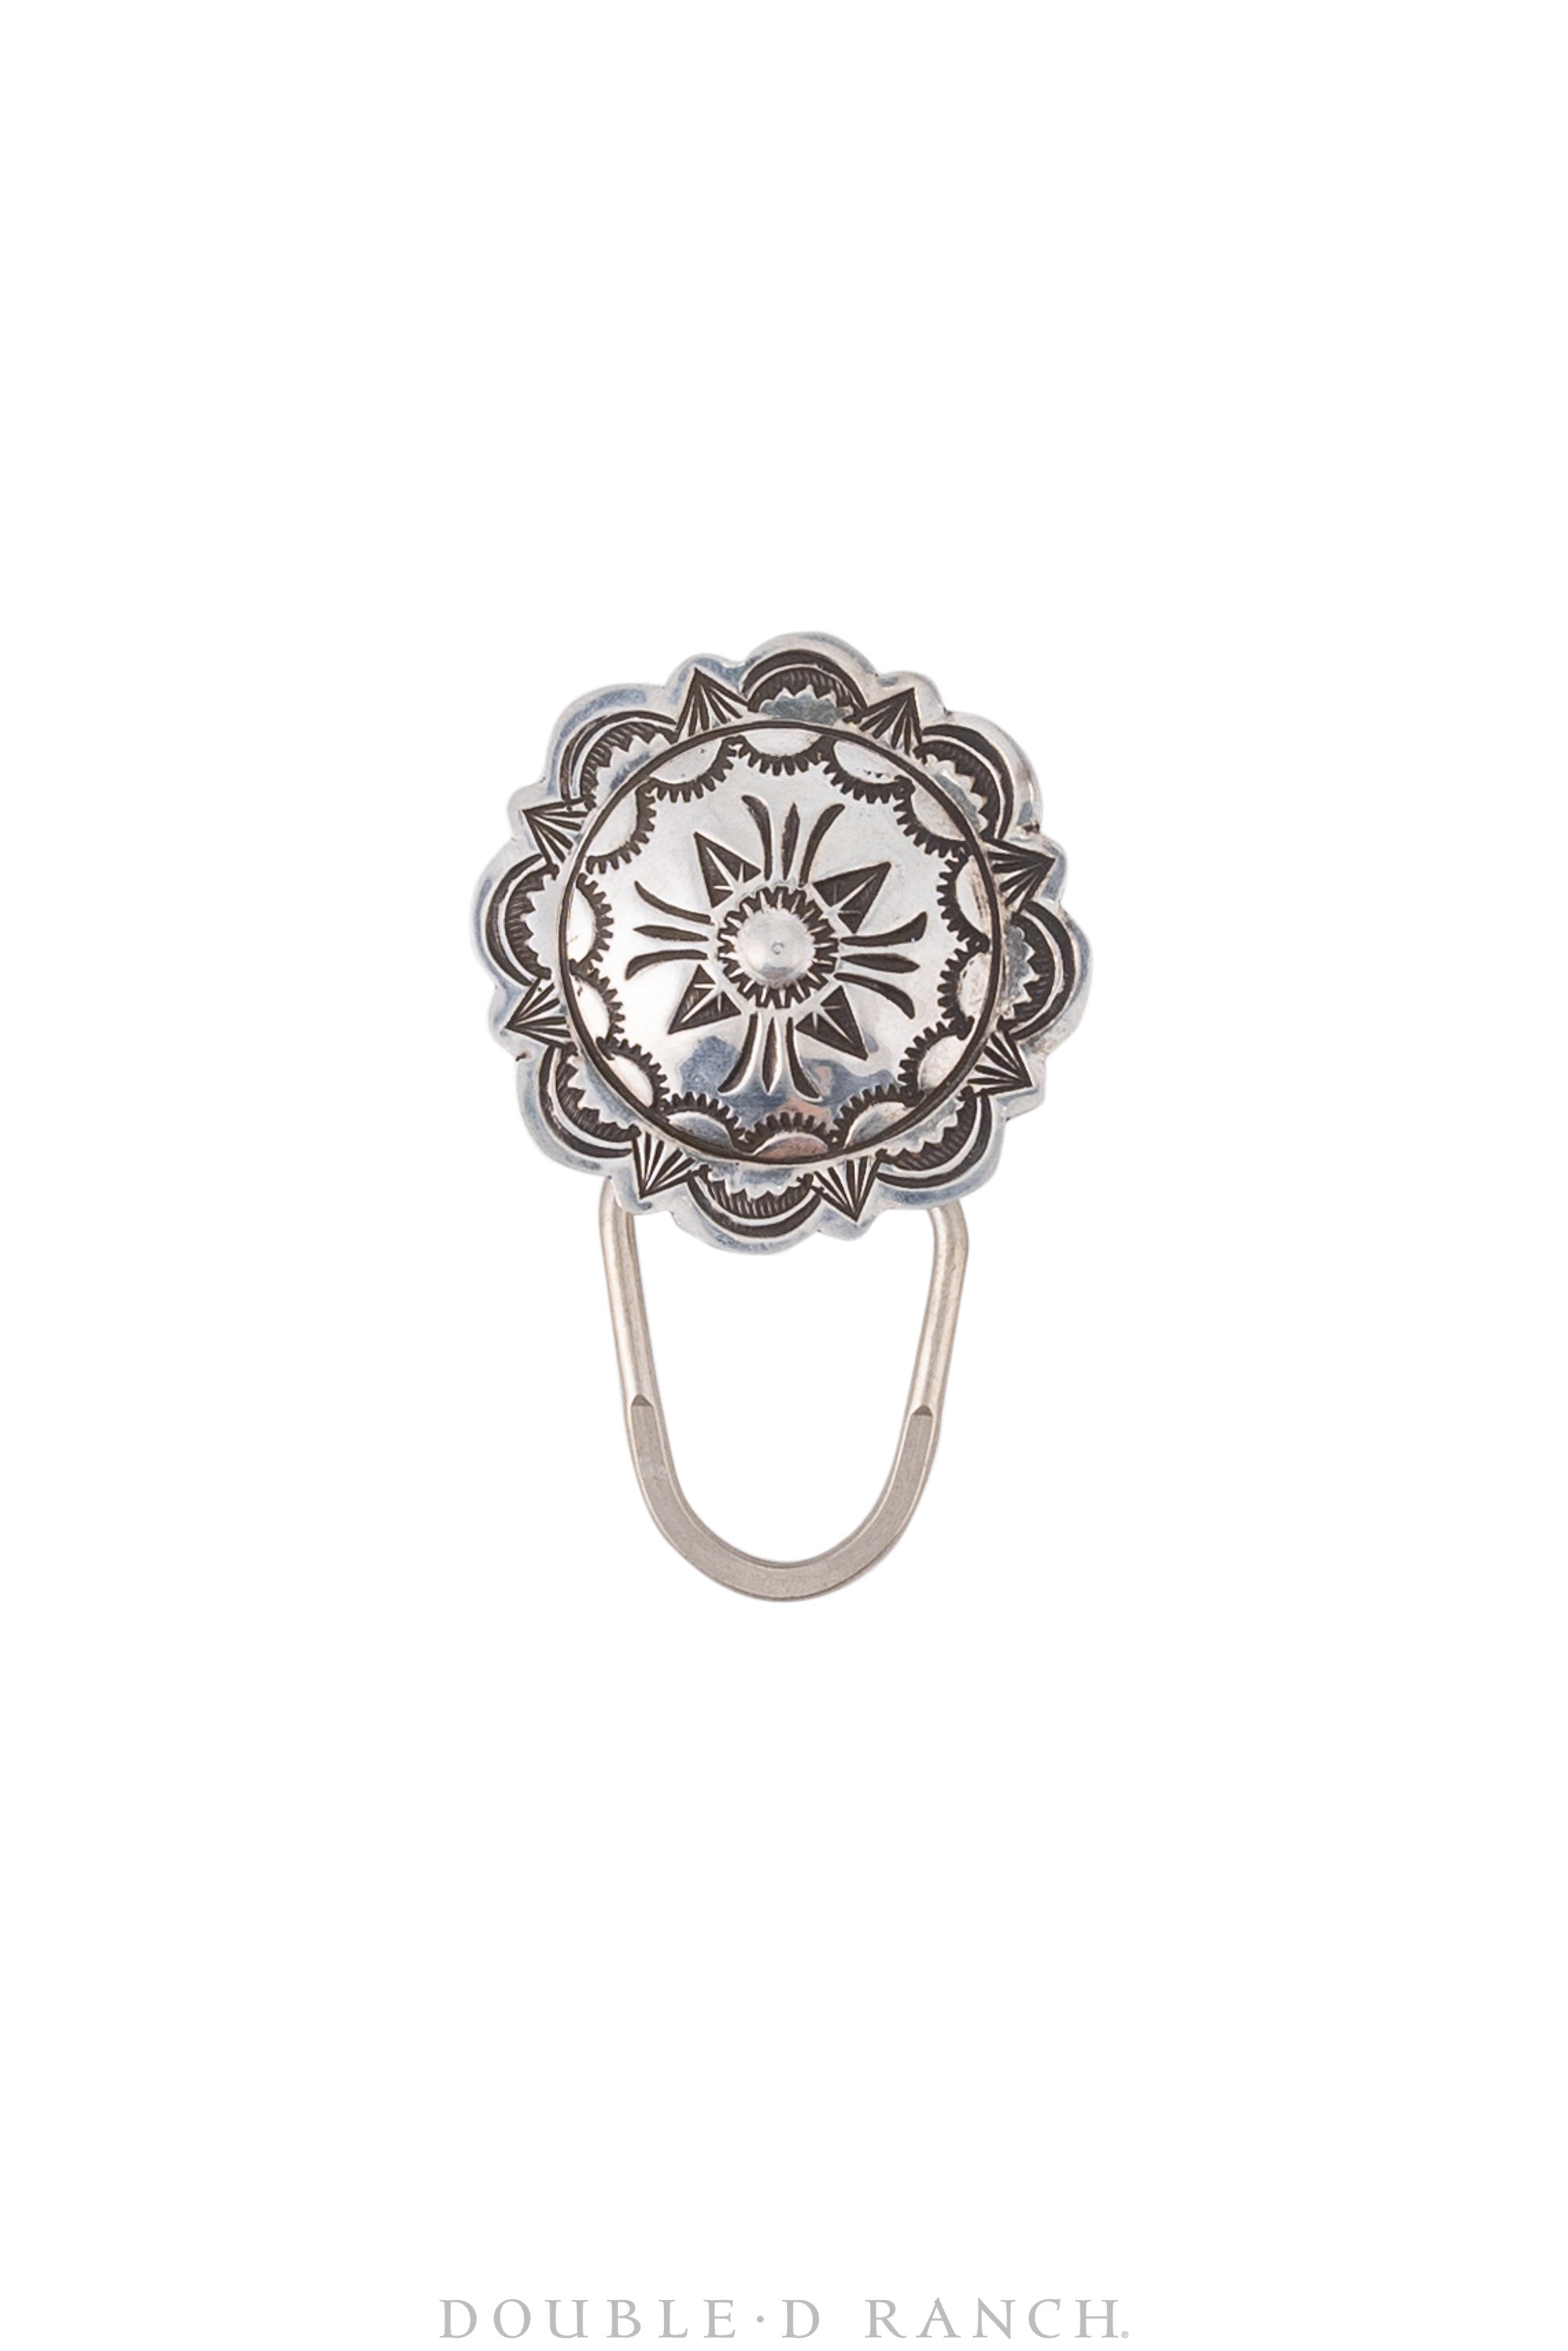 Miscellaneous, Key Ring, Concho, Stampwork, Contemporary, 356